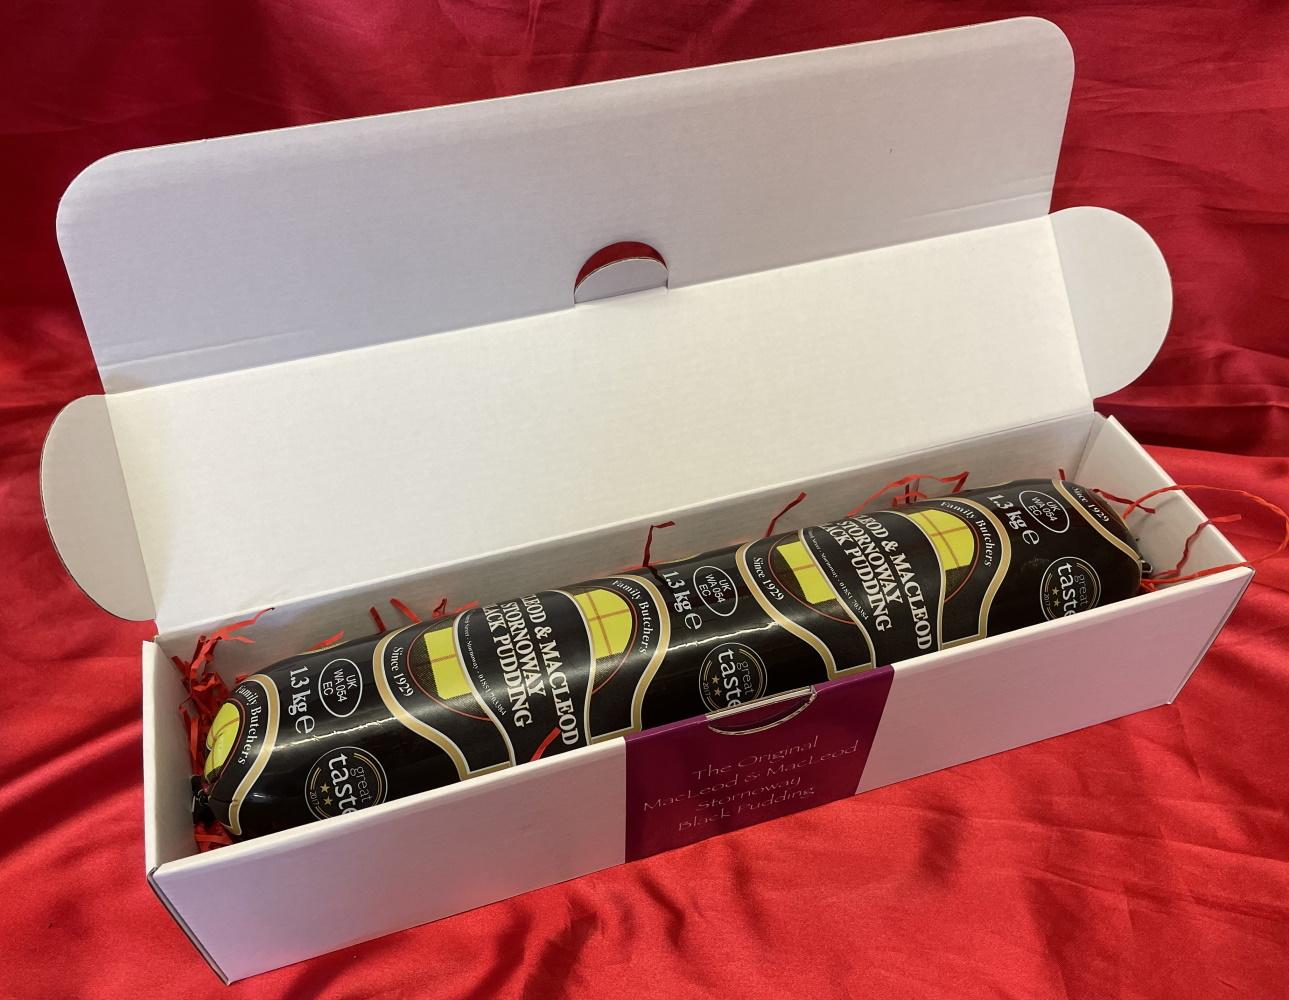 Stornoway Black Pudding in a Gift Box